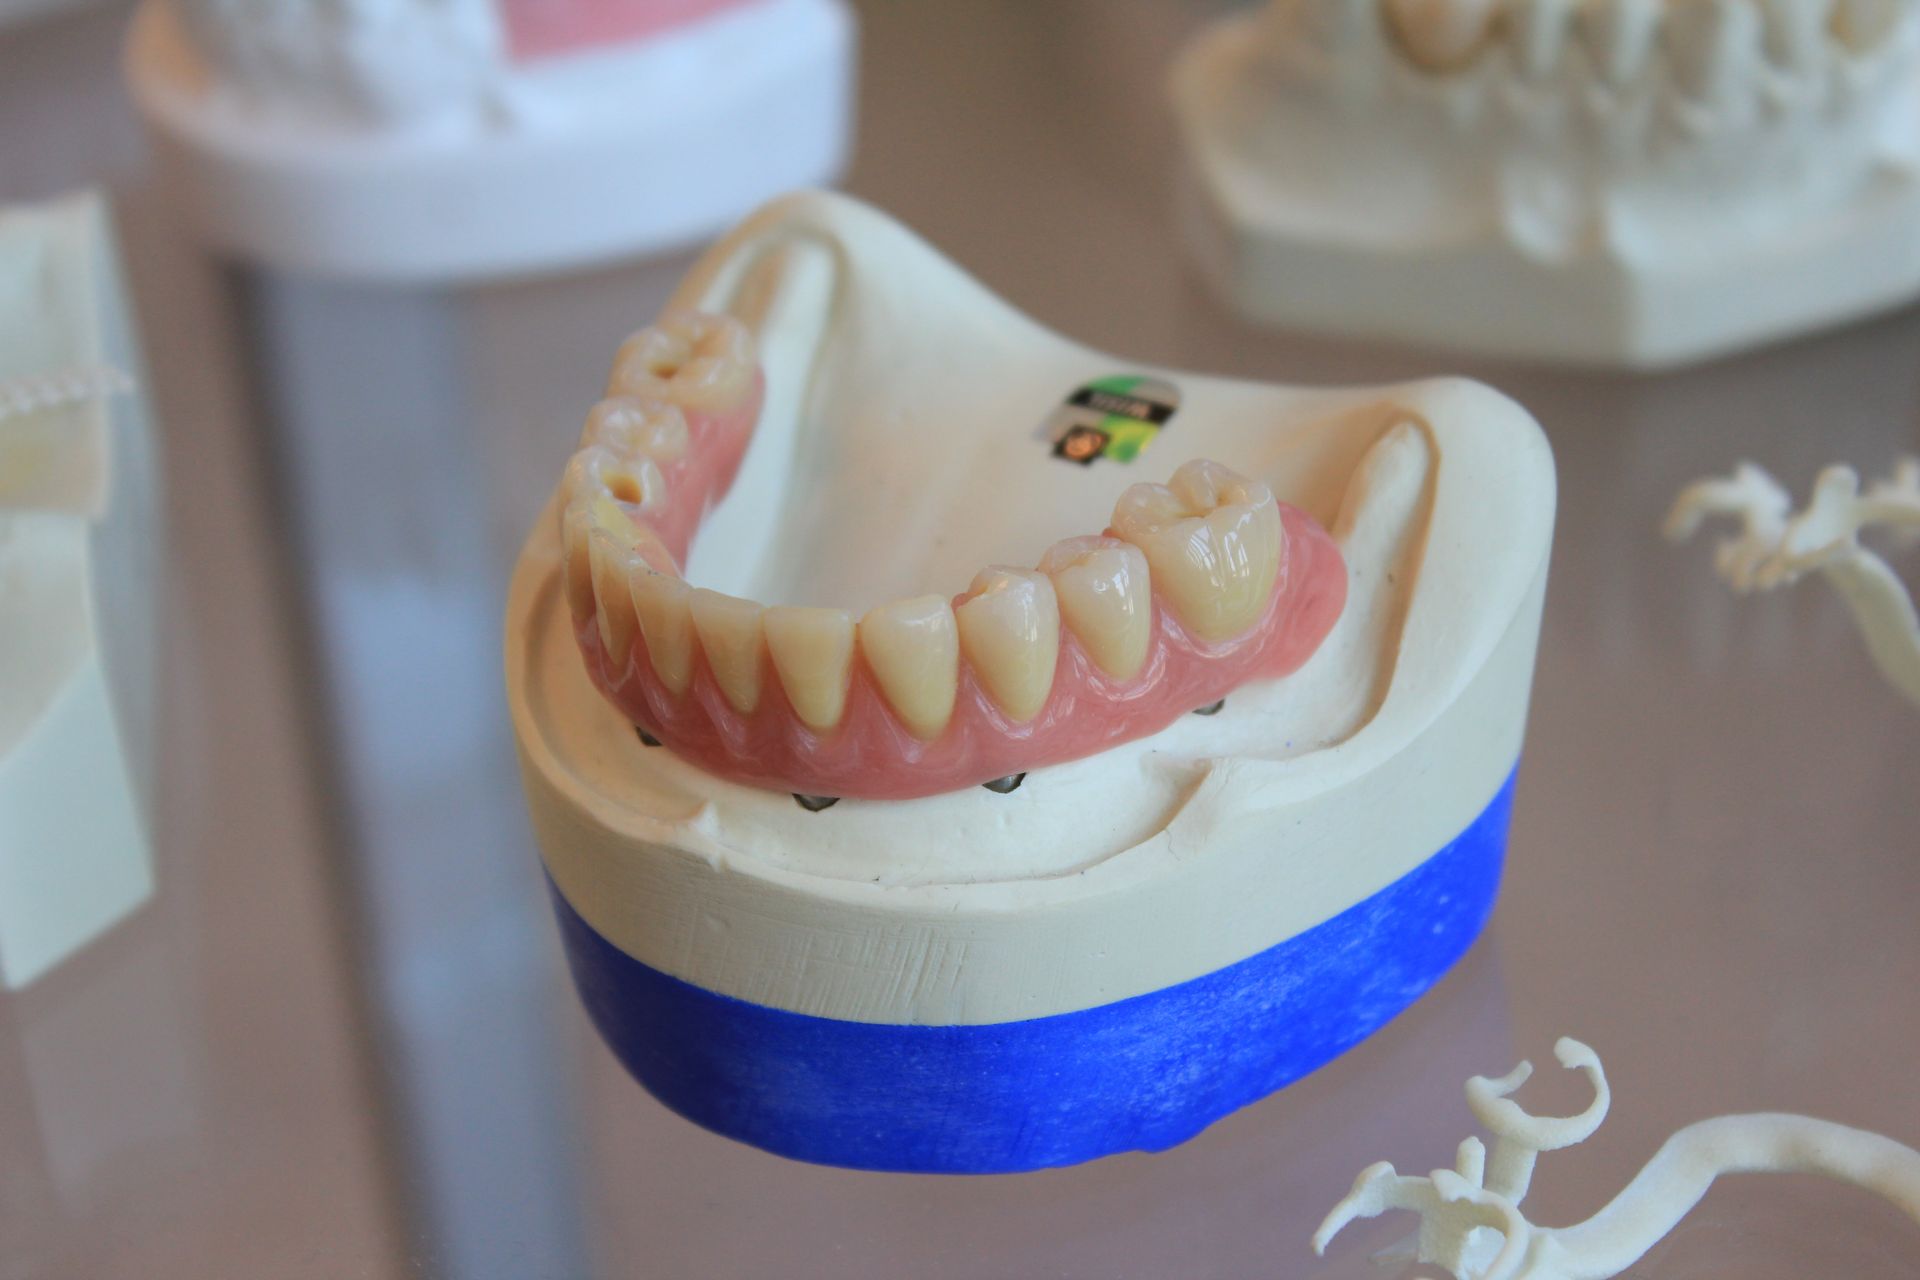 what does a tooth implant look like